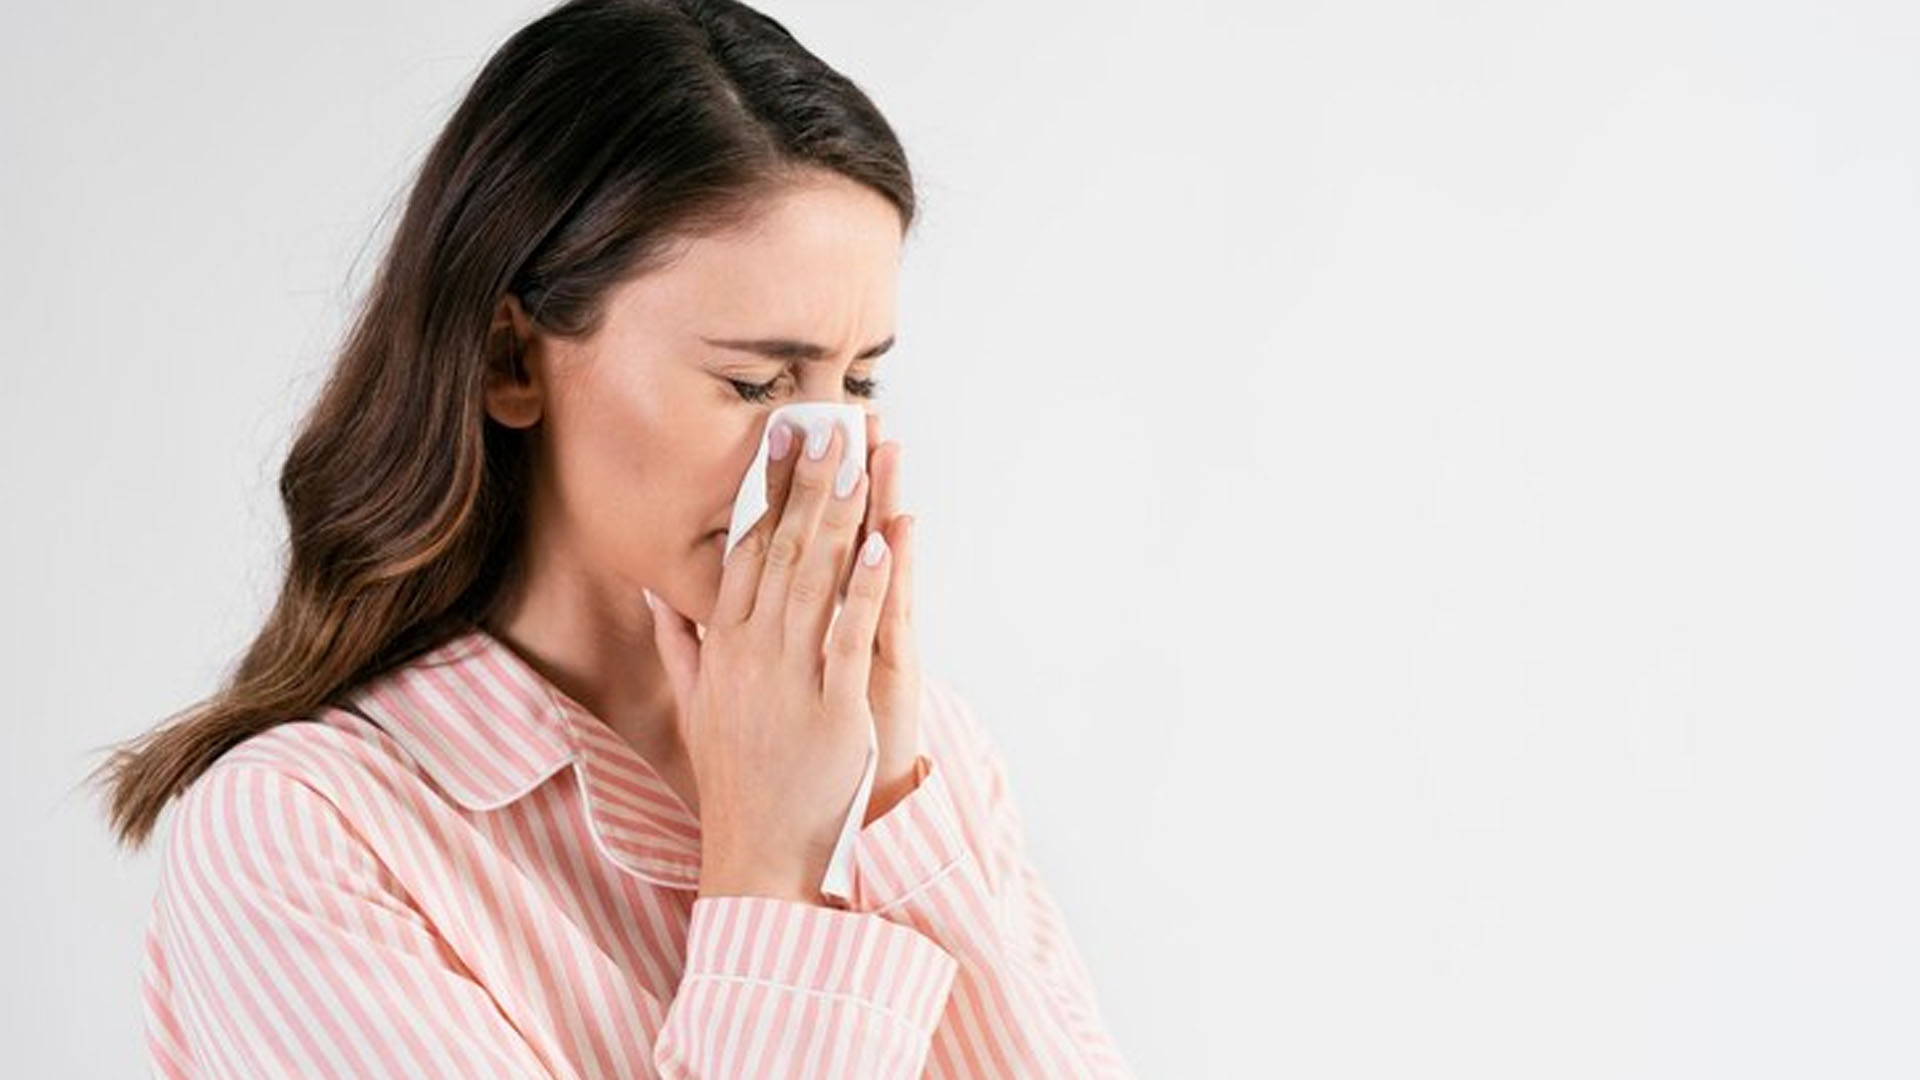 What are the Home Remedies for Sneezing?